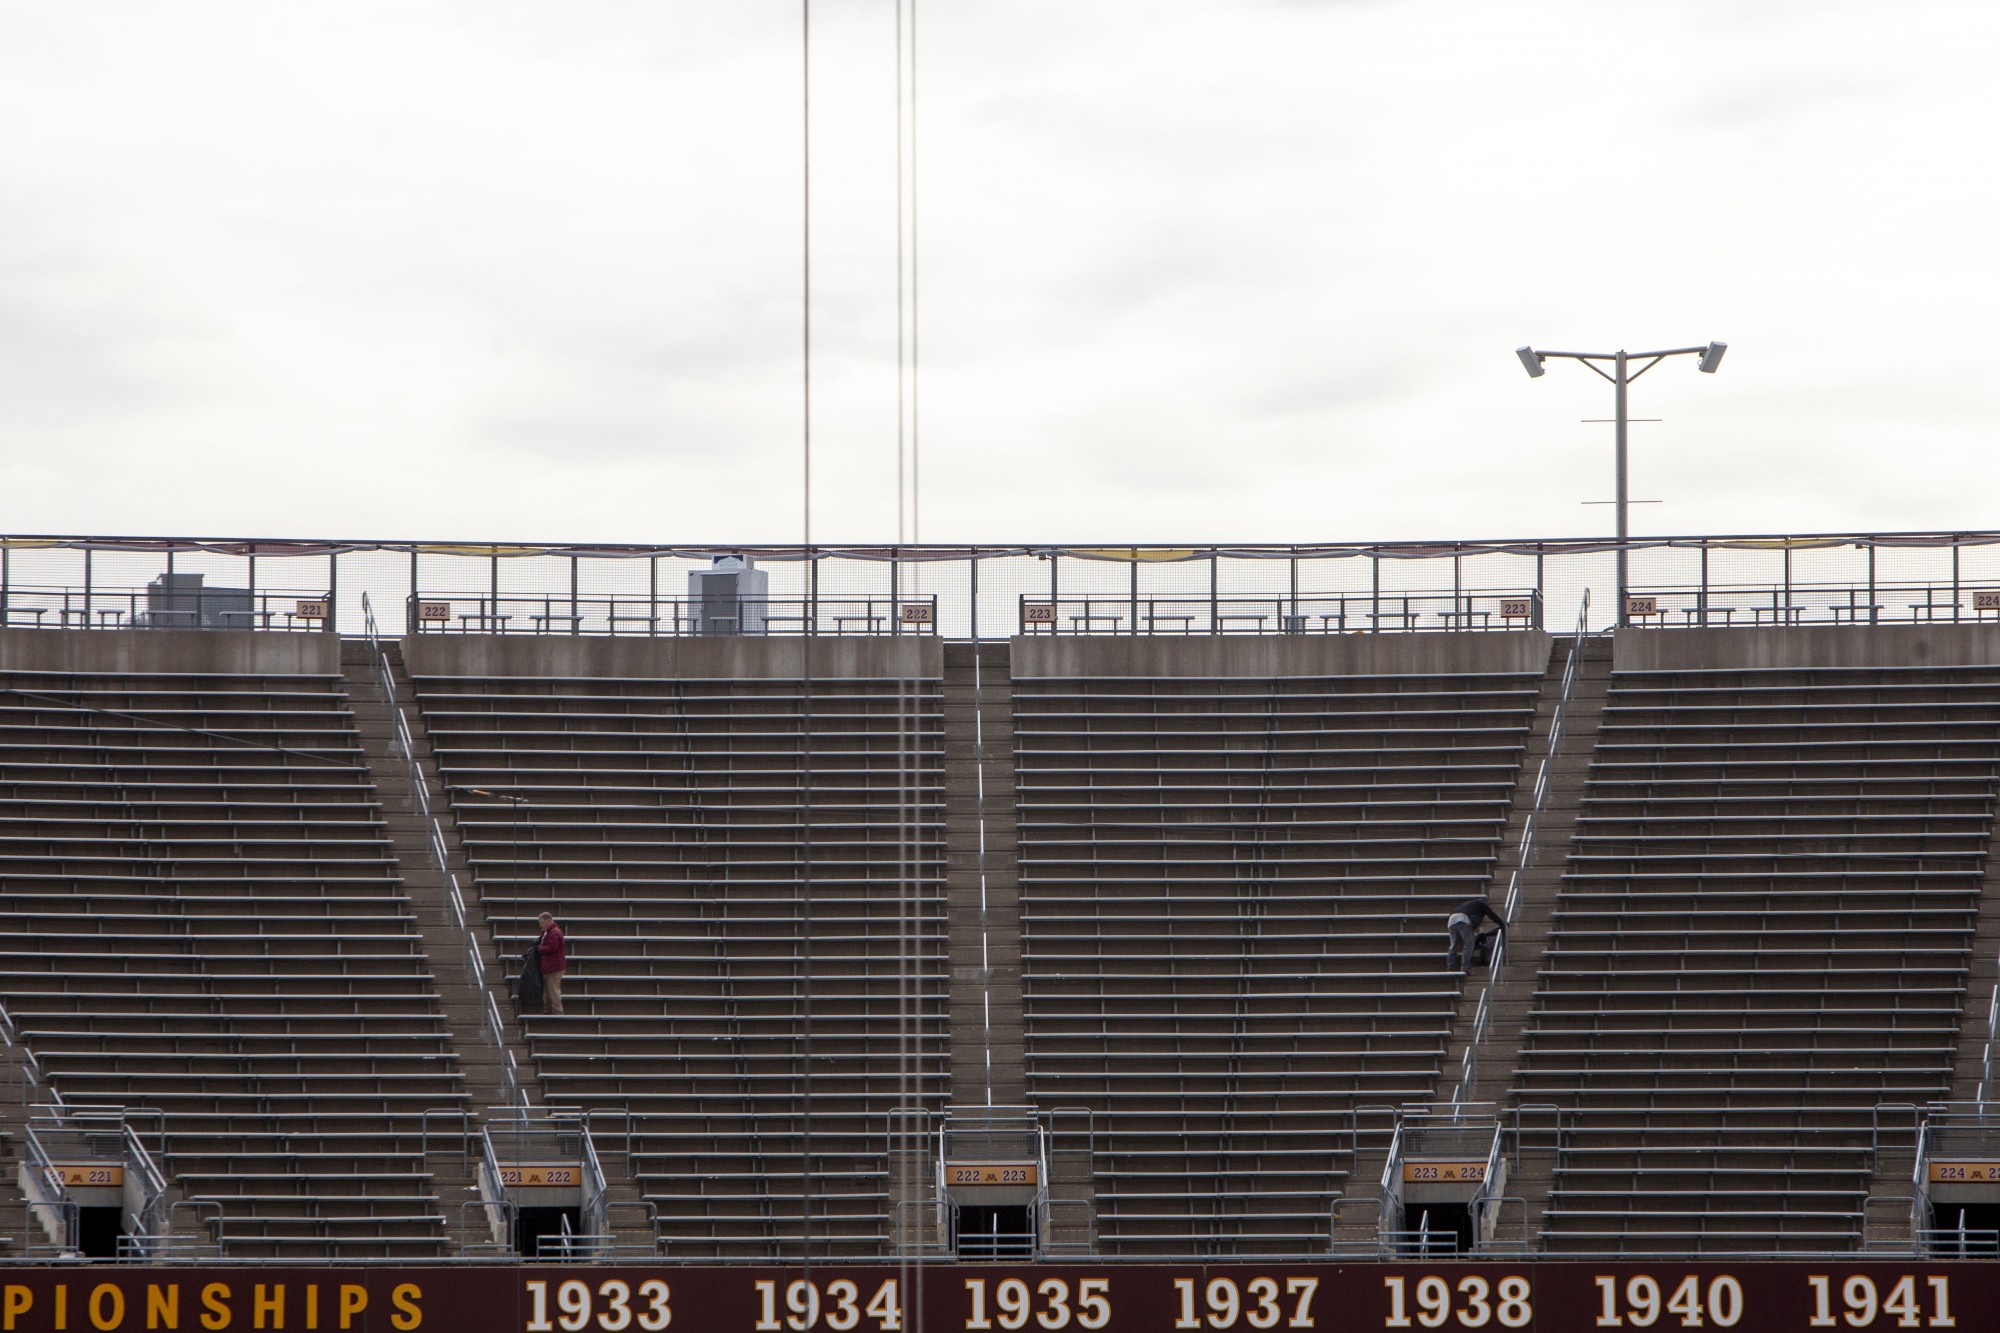 9:26 a.m.
Two workers are seen in the empty stands of TCF Bank Stadium. 